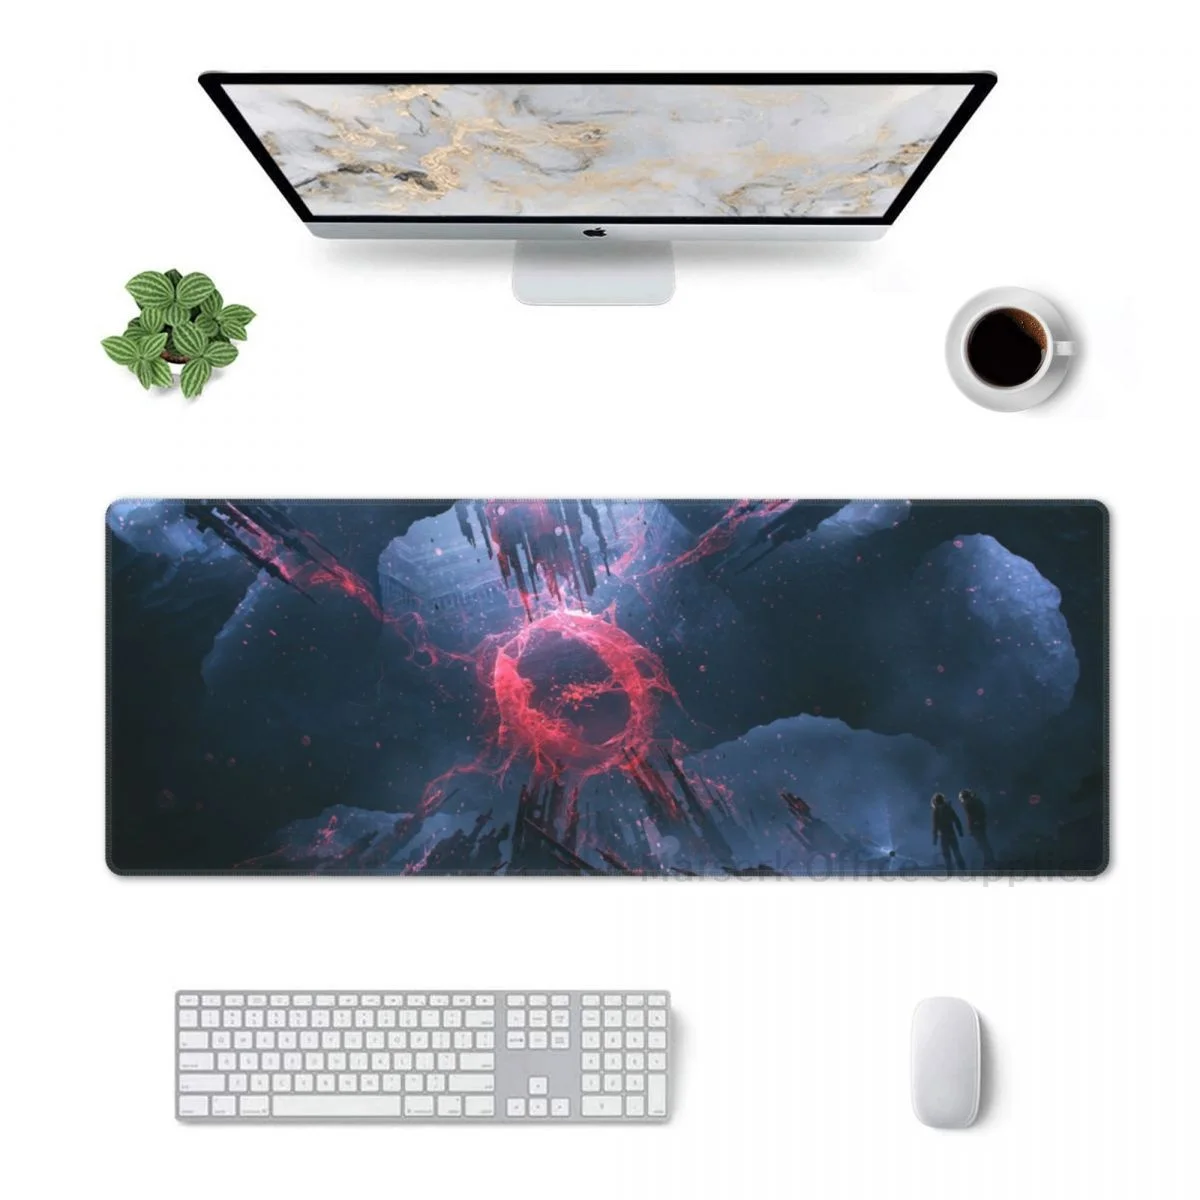 

Source Of Life Large Mouse Pad Astronaut And Space Computer Desk Keyboard Mat 30x80cm Gamers Decoracion Non-Slip Rubber Carpet